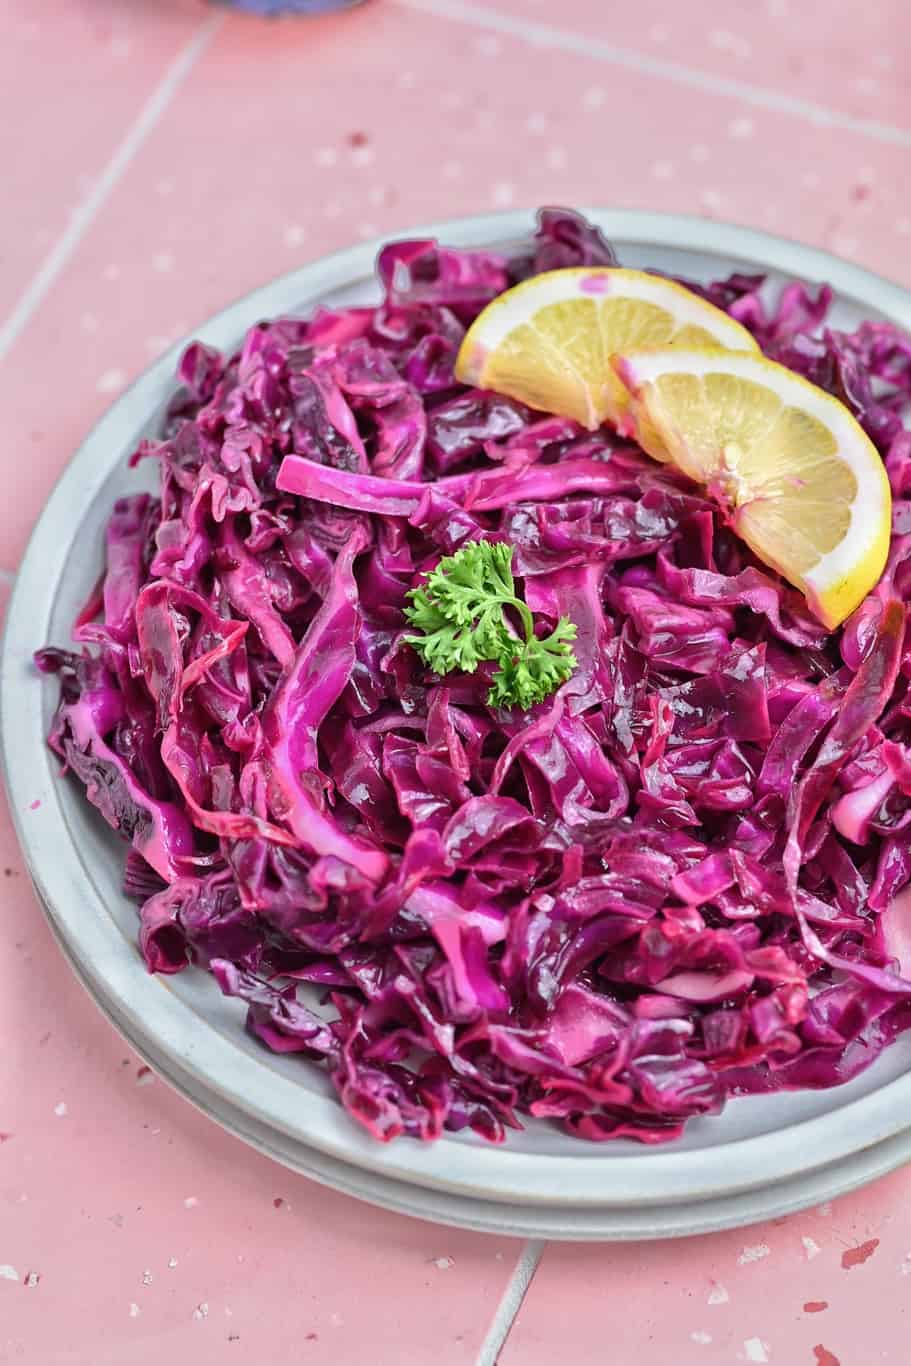 a bowl of red cabbage salad with lemon juice and oil dressing